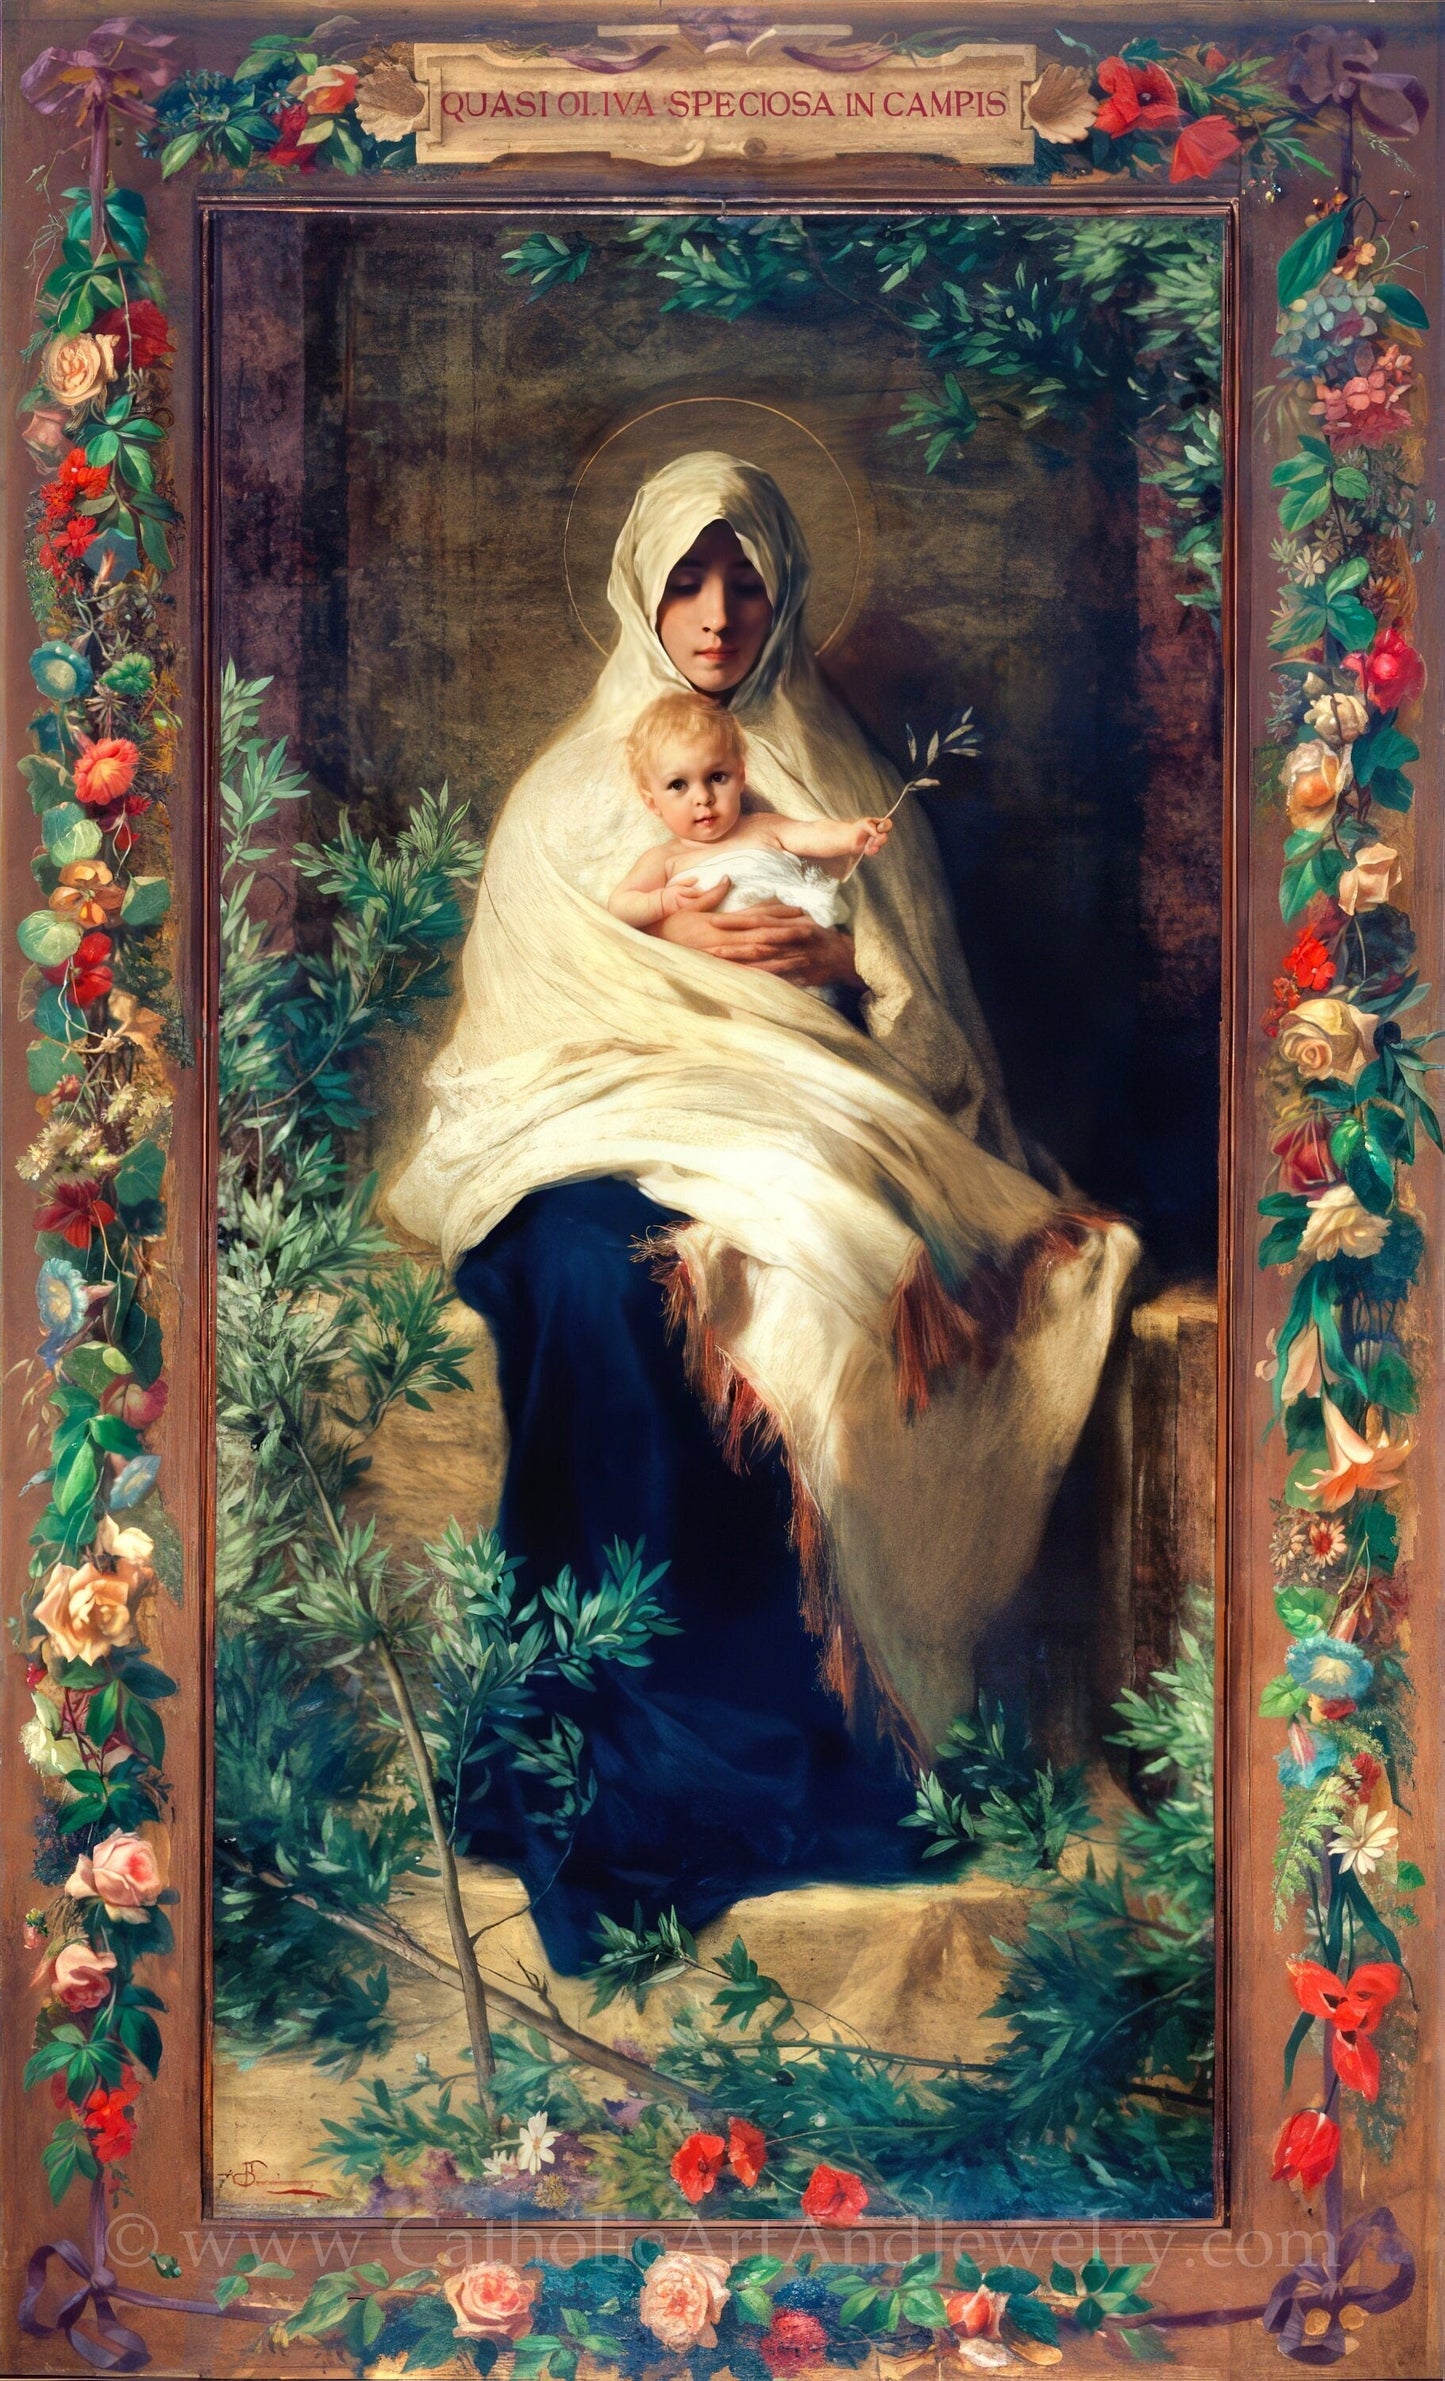 Our Lady of the Olives by Nicolò Barabino